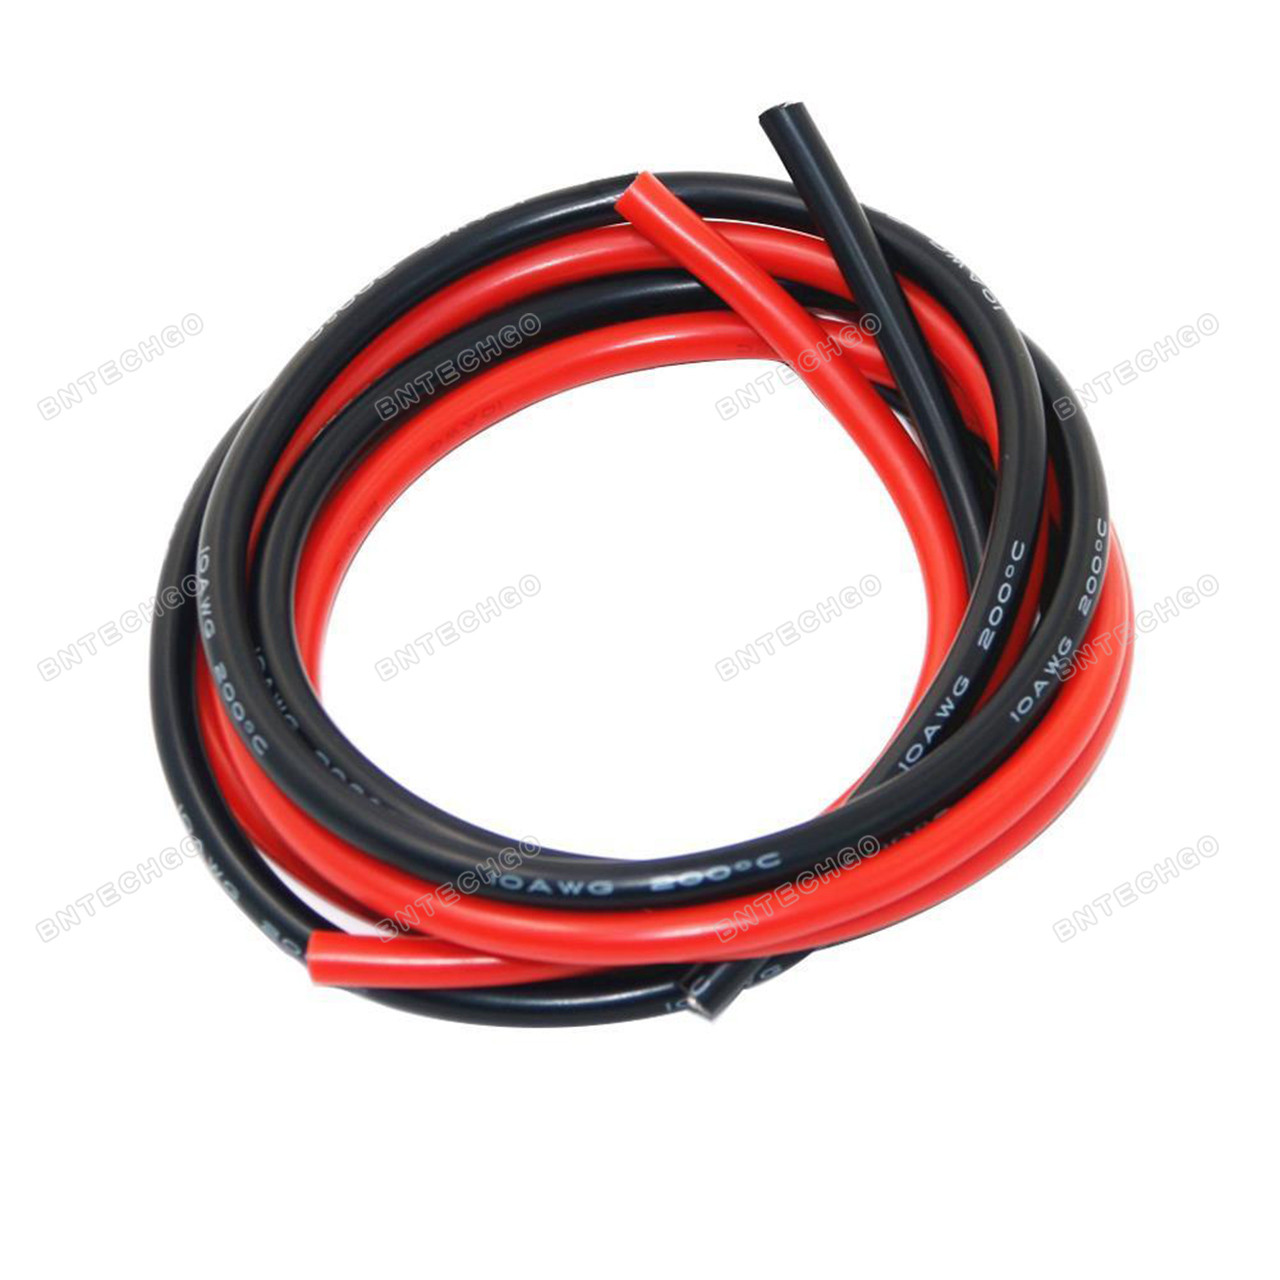 BNTECHGO 30 Gauge Silicone Wire Kit 10 Color Each 10 ft Flexible 30 AW